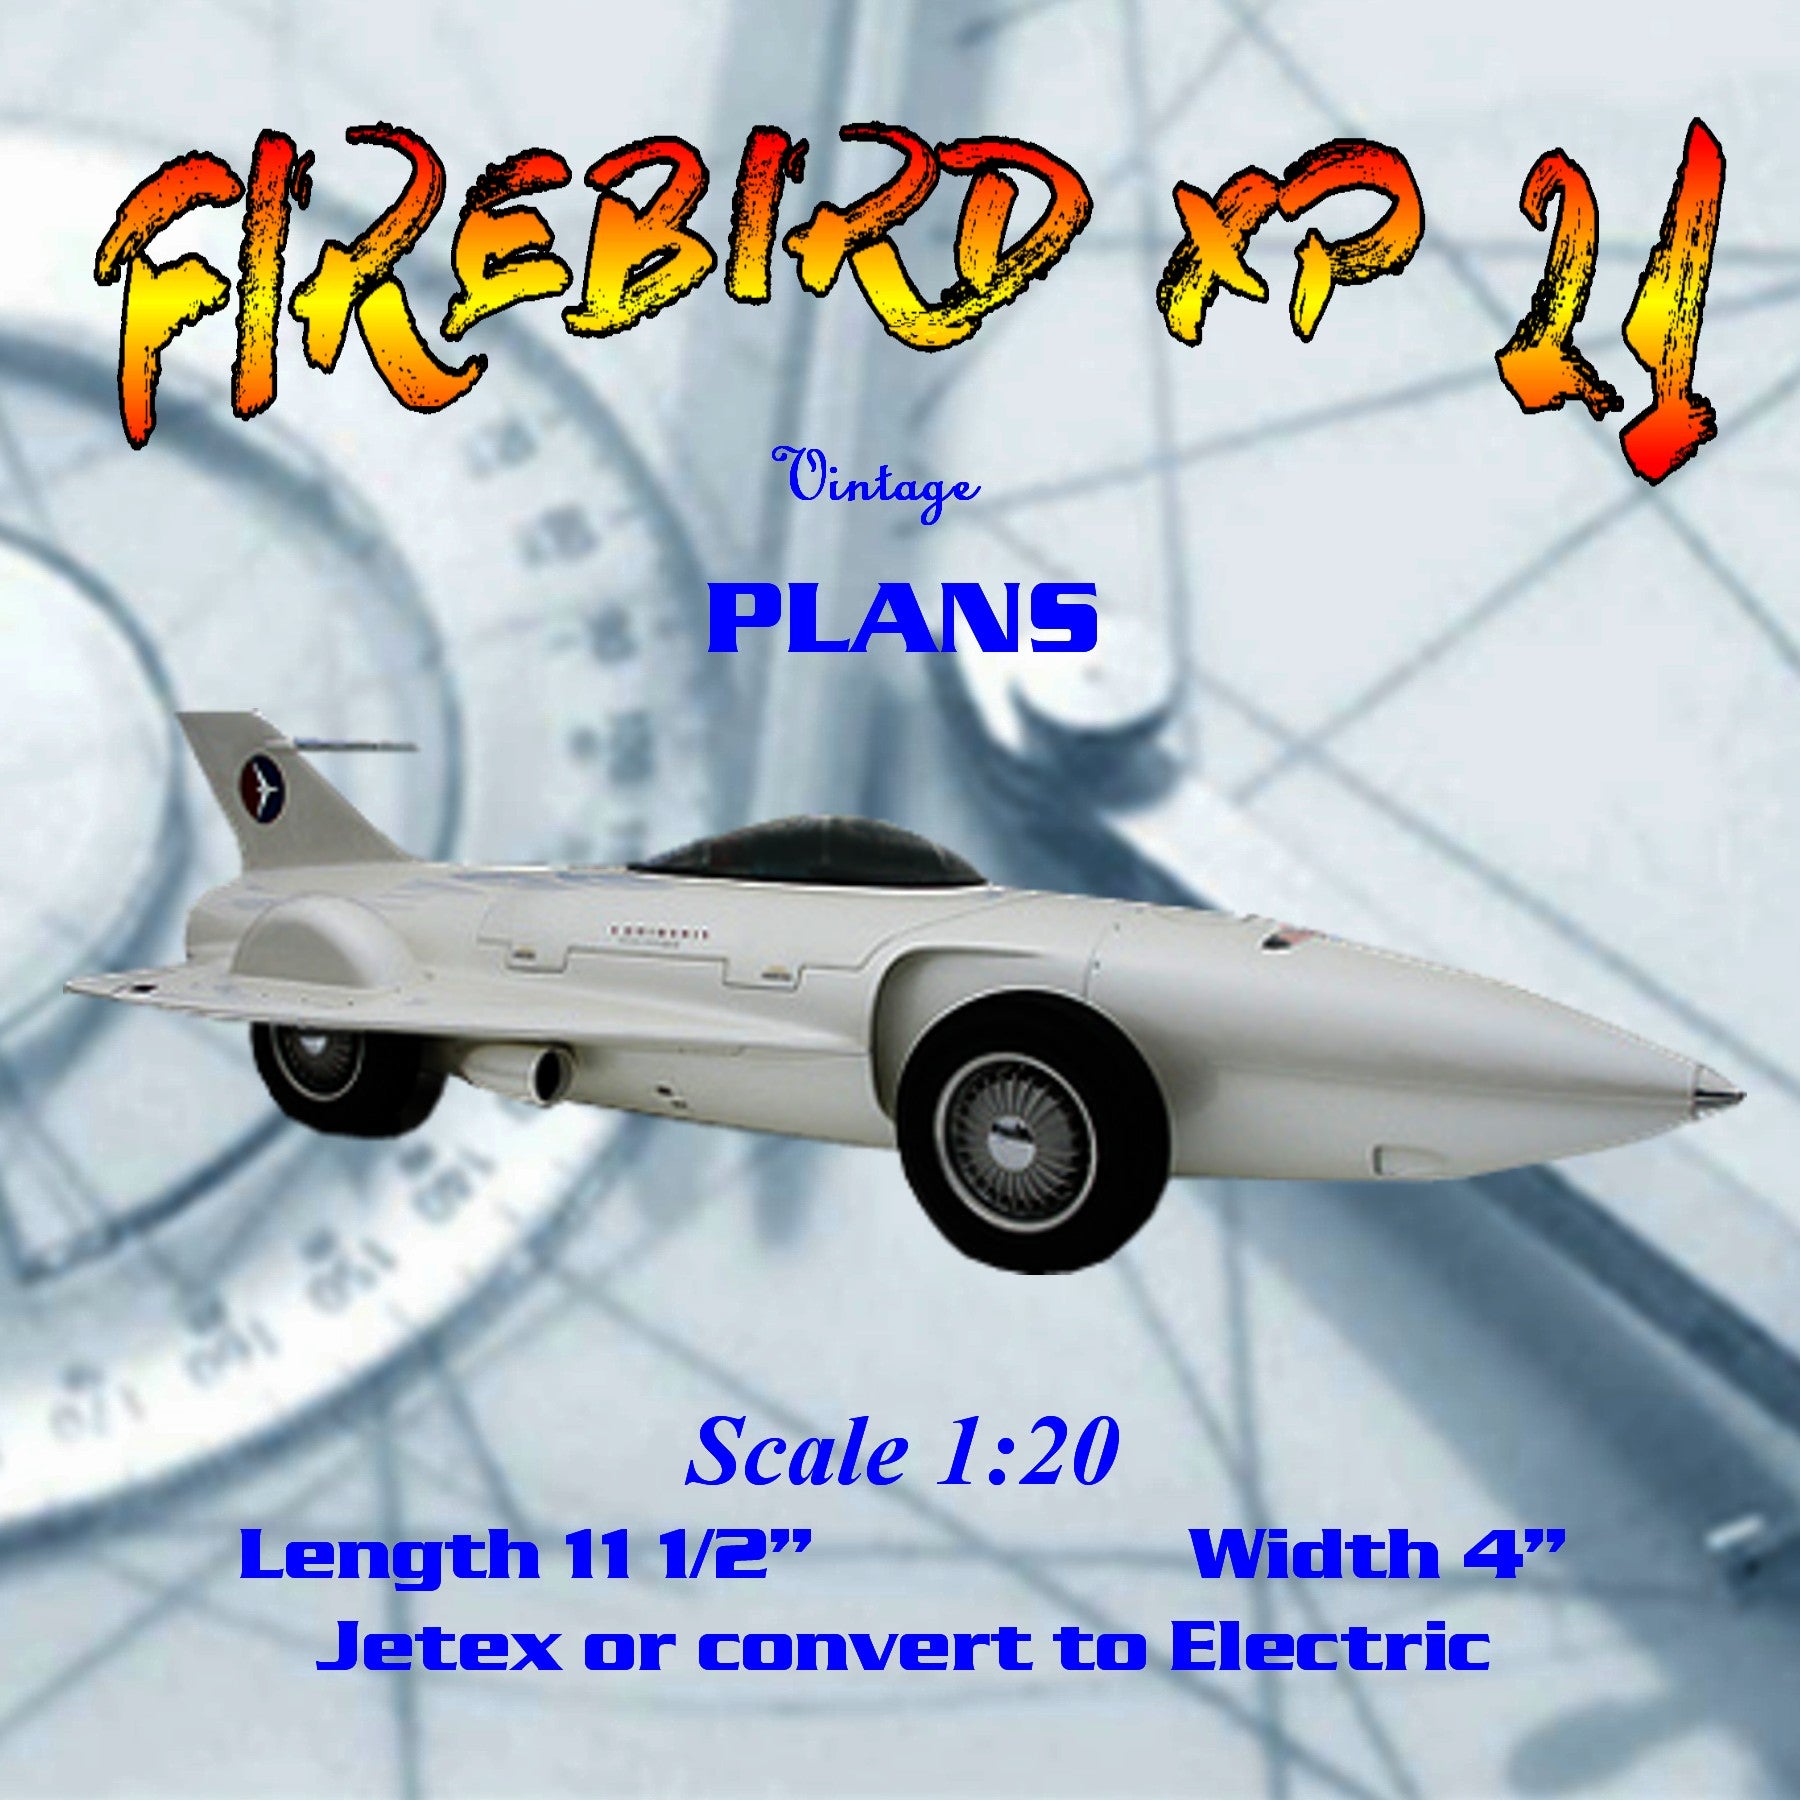 full size printed plan scale 1:20 firebird xp 21 jetex 50 motor  or  convert to electric